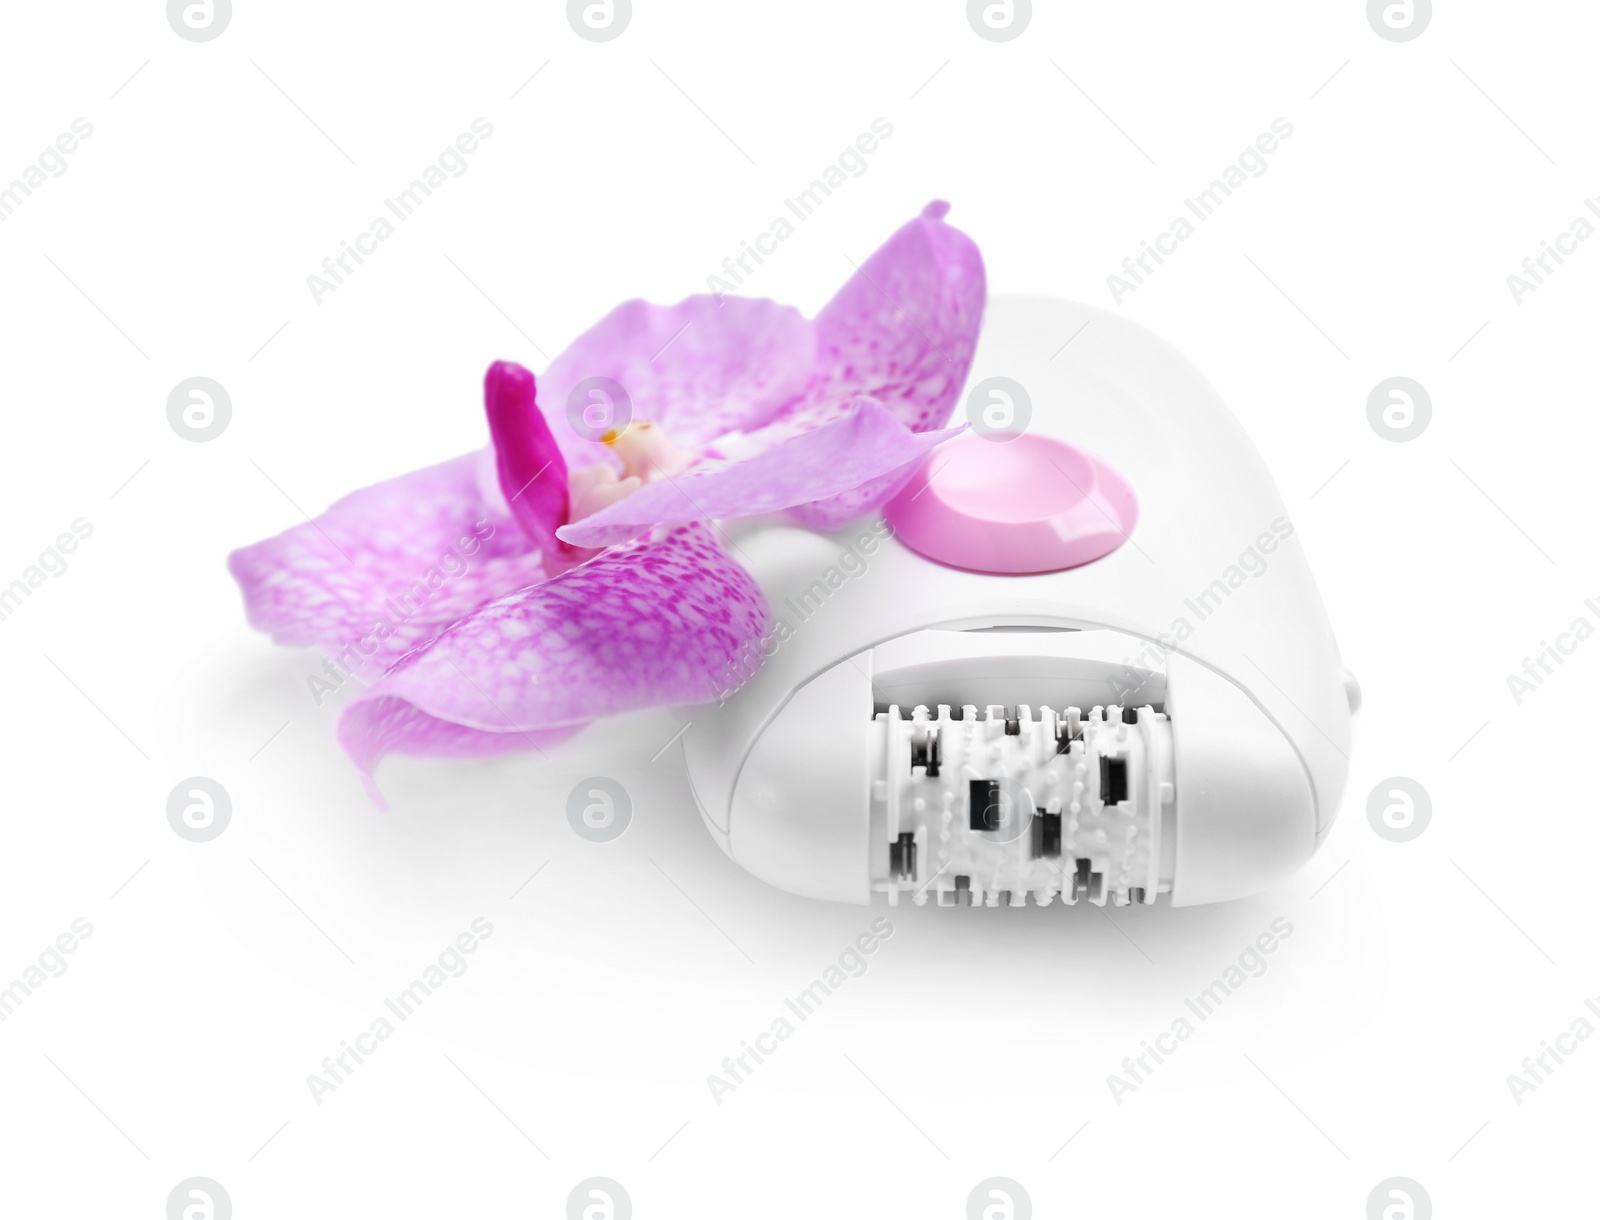 Image of Modern epilator and orchid flower on white background